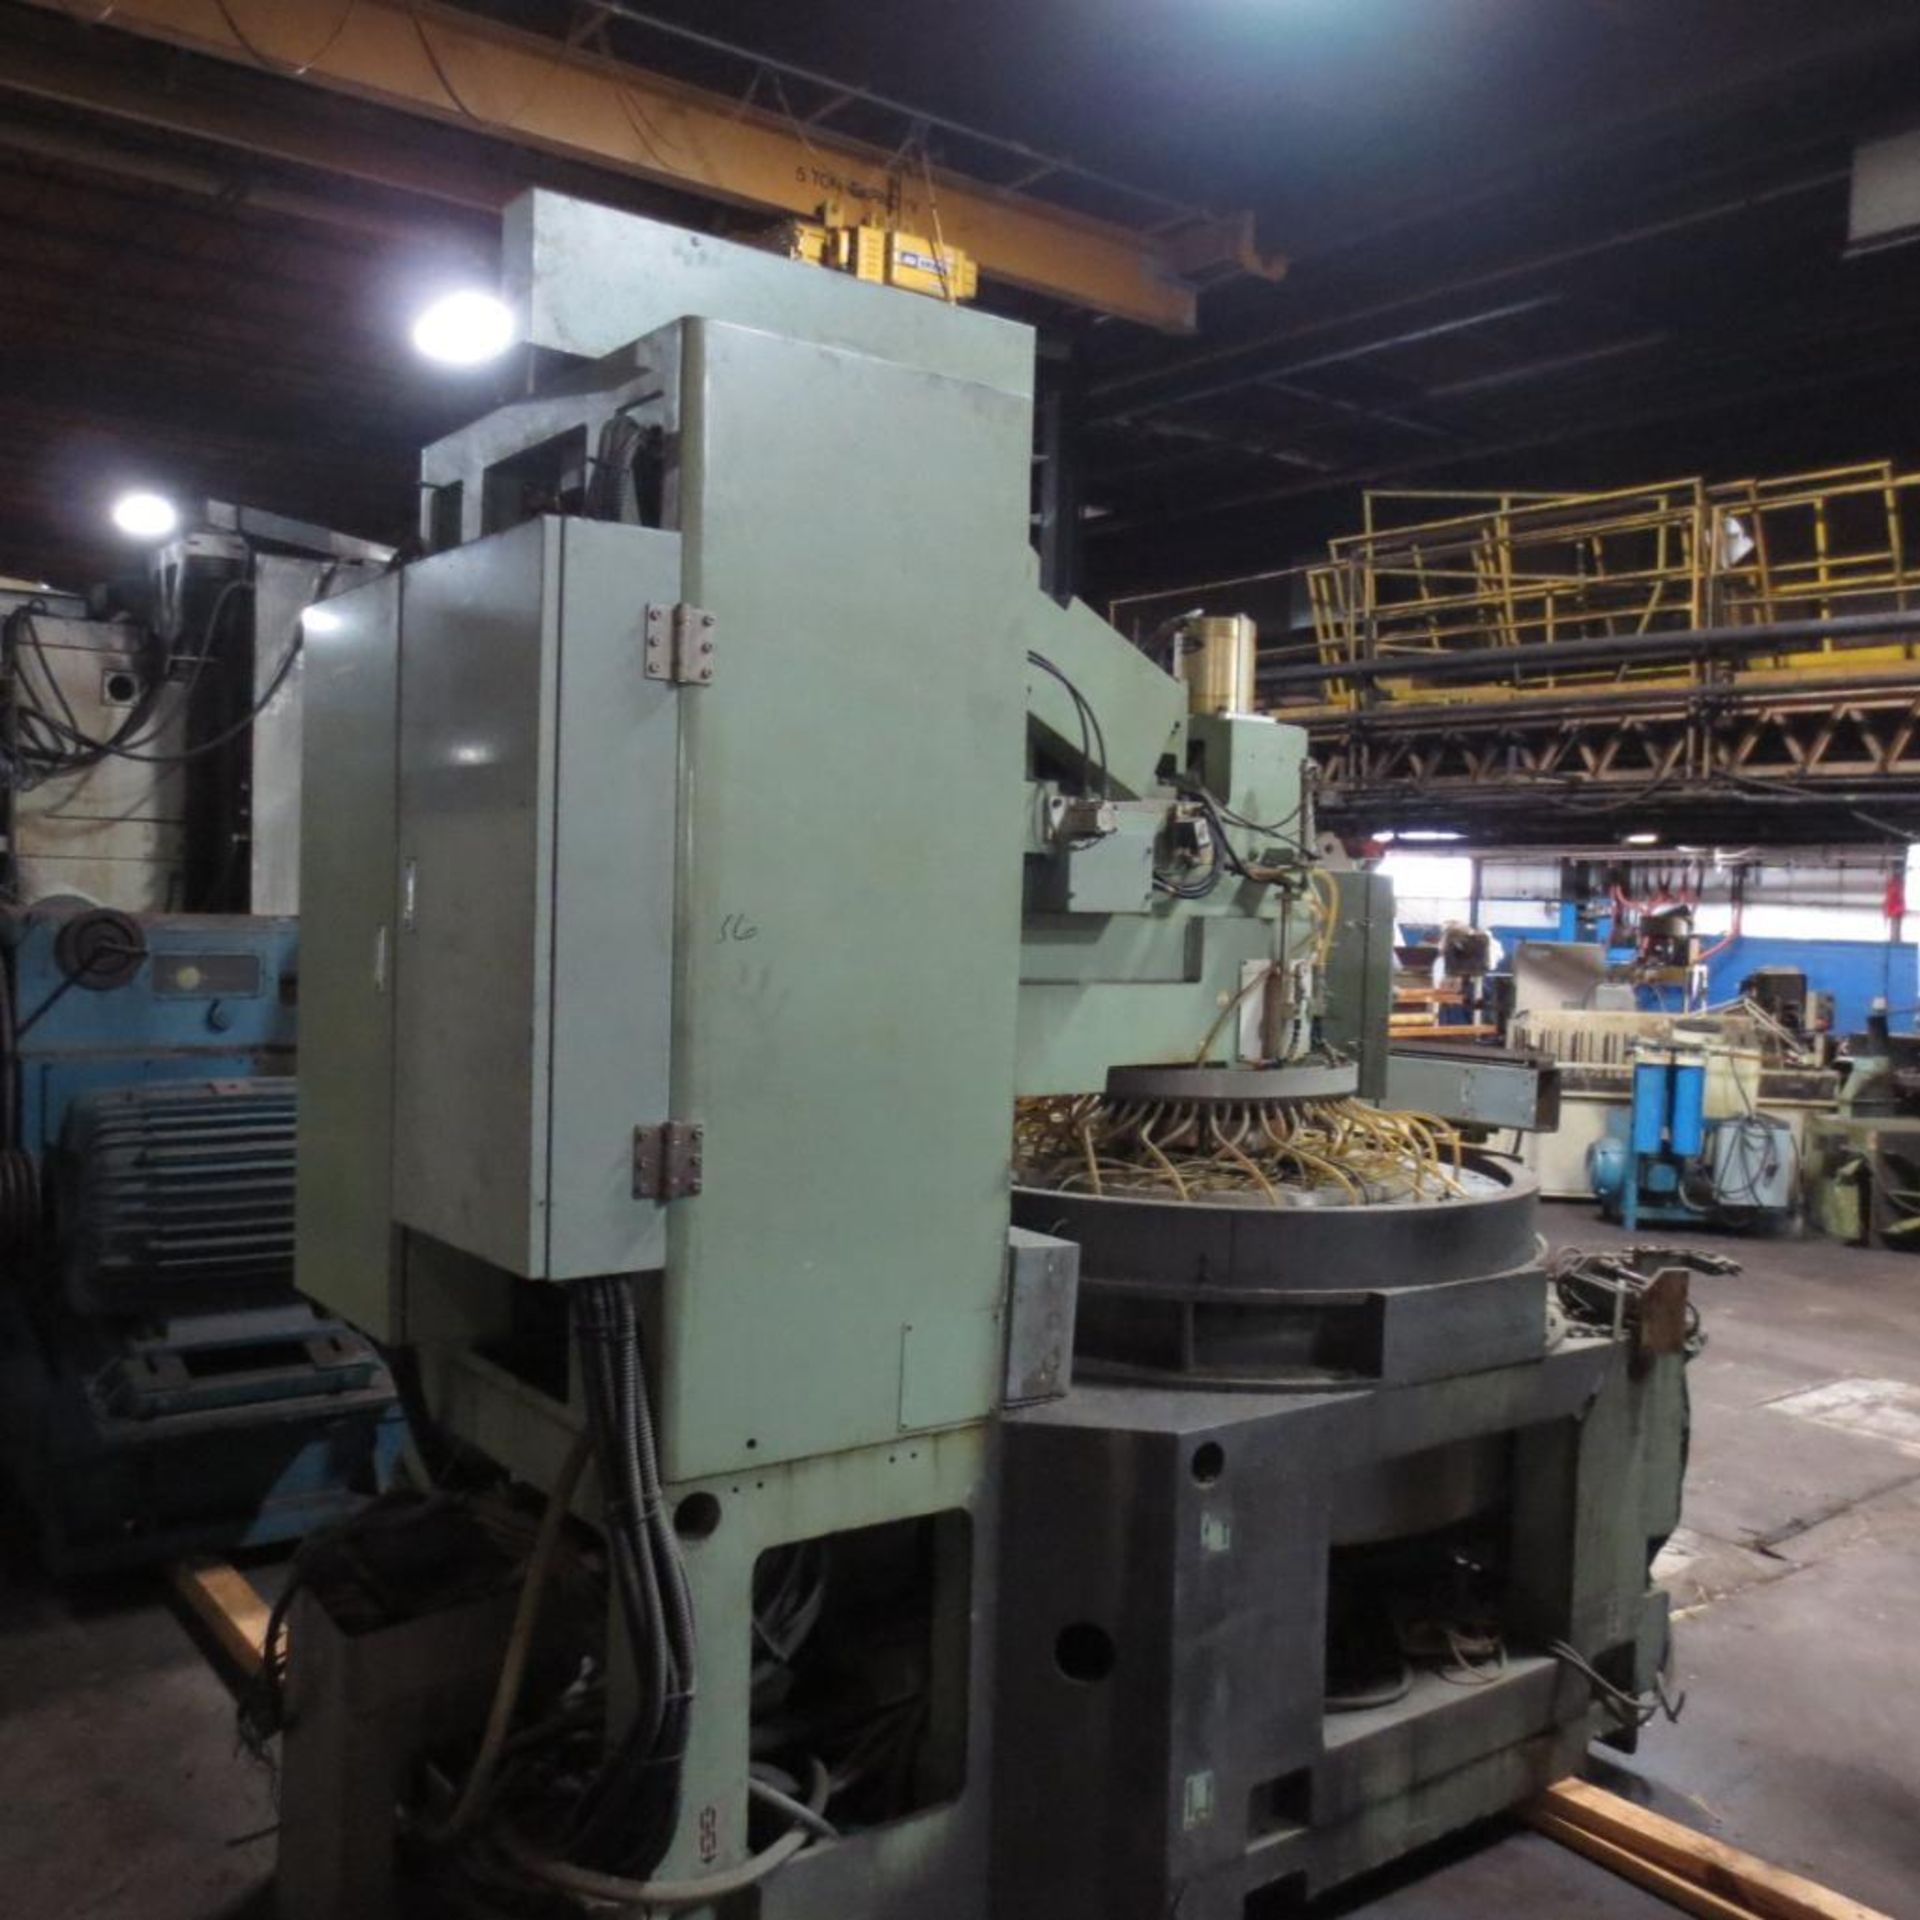 SSC System Seiko Vertical Lapping Machine S/N: 3745 (1996) CNC Control. Loading Fee is $850.00 - Image 7 of 8